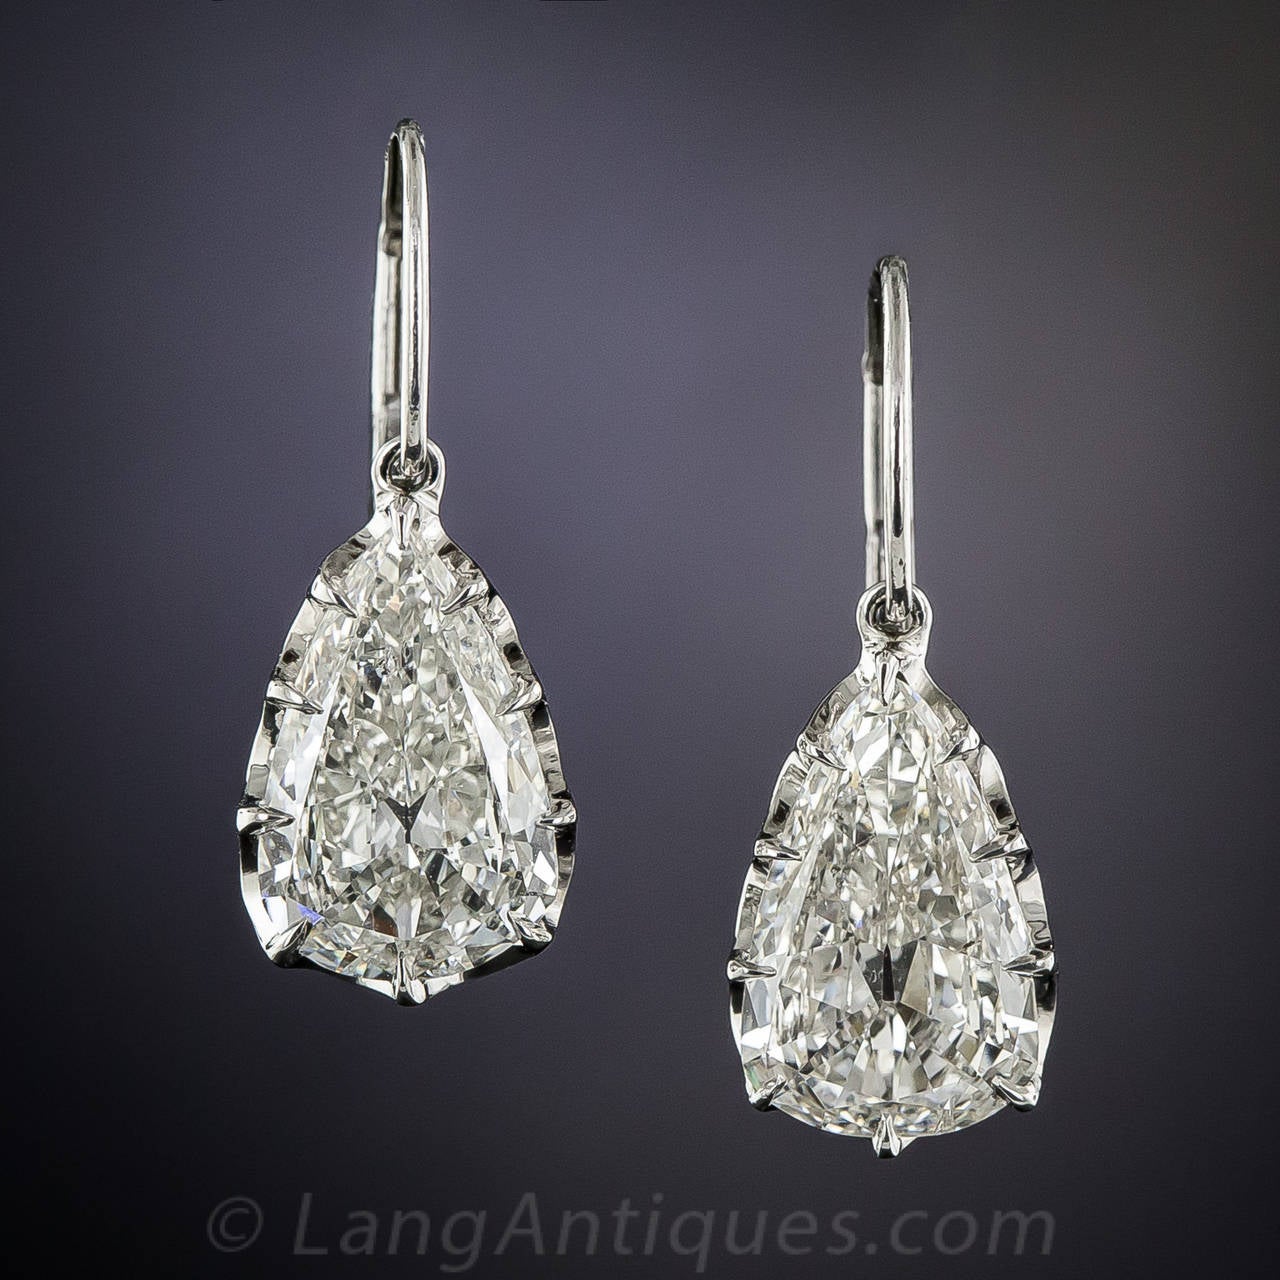 Magnifique! After acquiring this rare and radiant pair of vintage pear shape diamonds, weighing 1.69 and 1.60 carats respectively, 3.29 carats total (yet presenting about 2 carats each, due to their antique cuts), we commissioned one of our finest